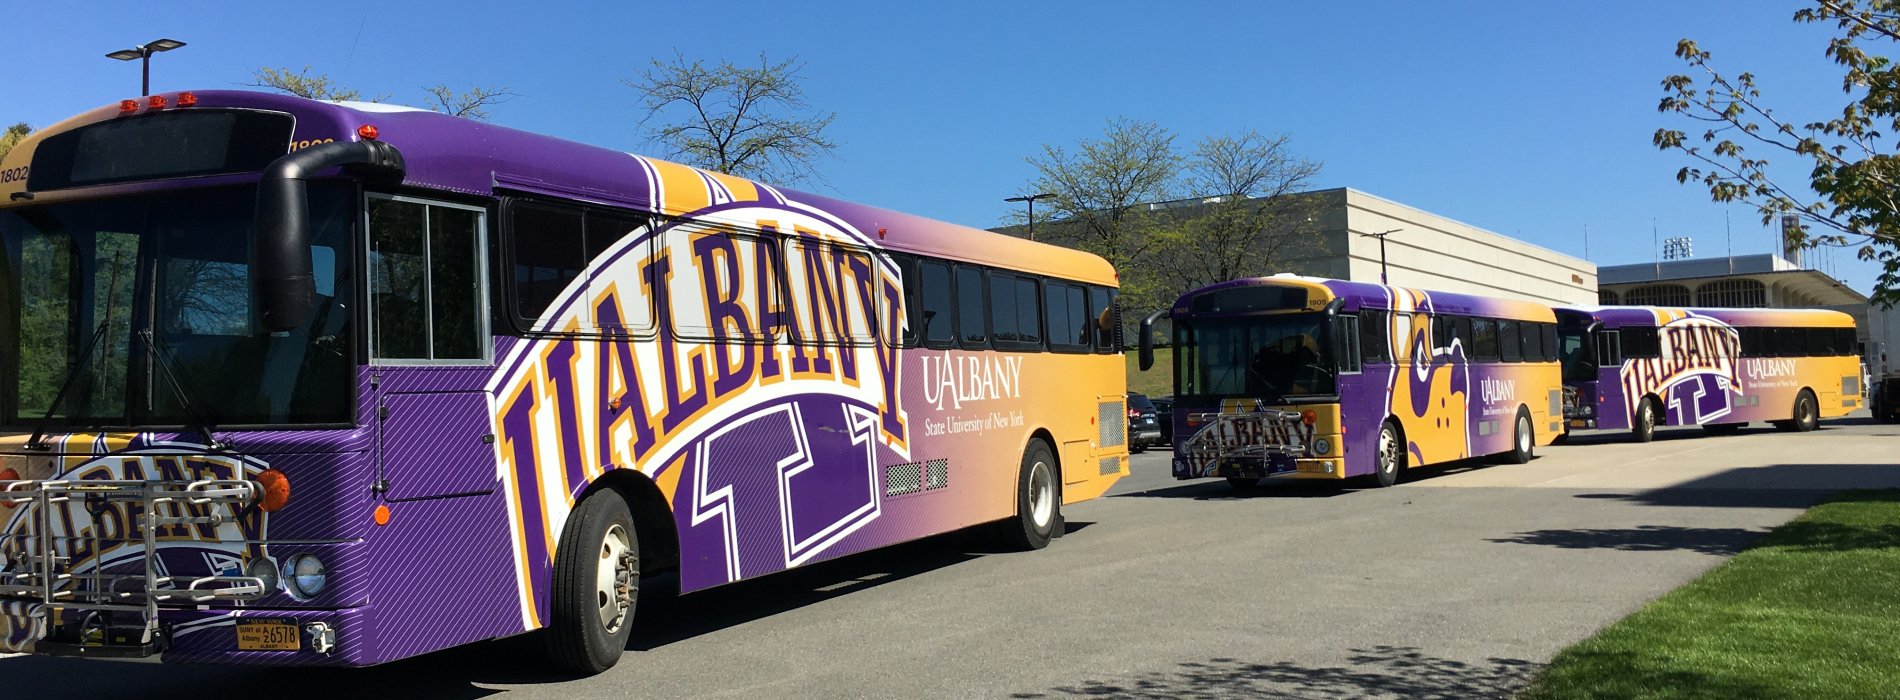 Three buses with UAlbany logo are parked outside in a line